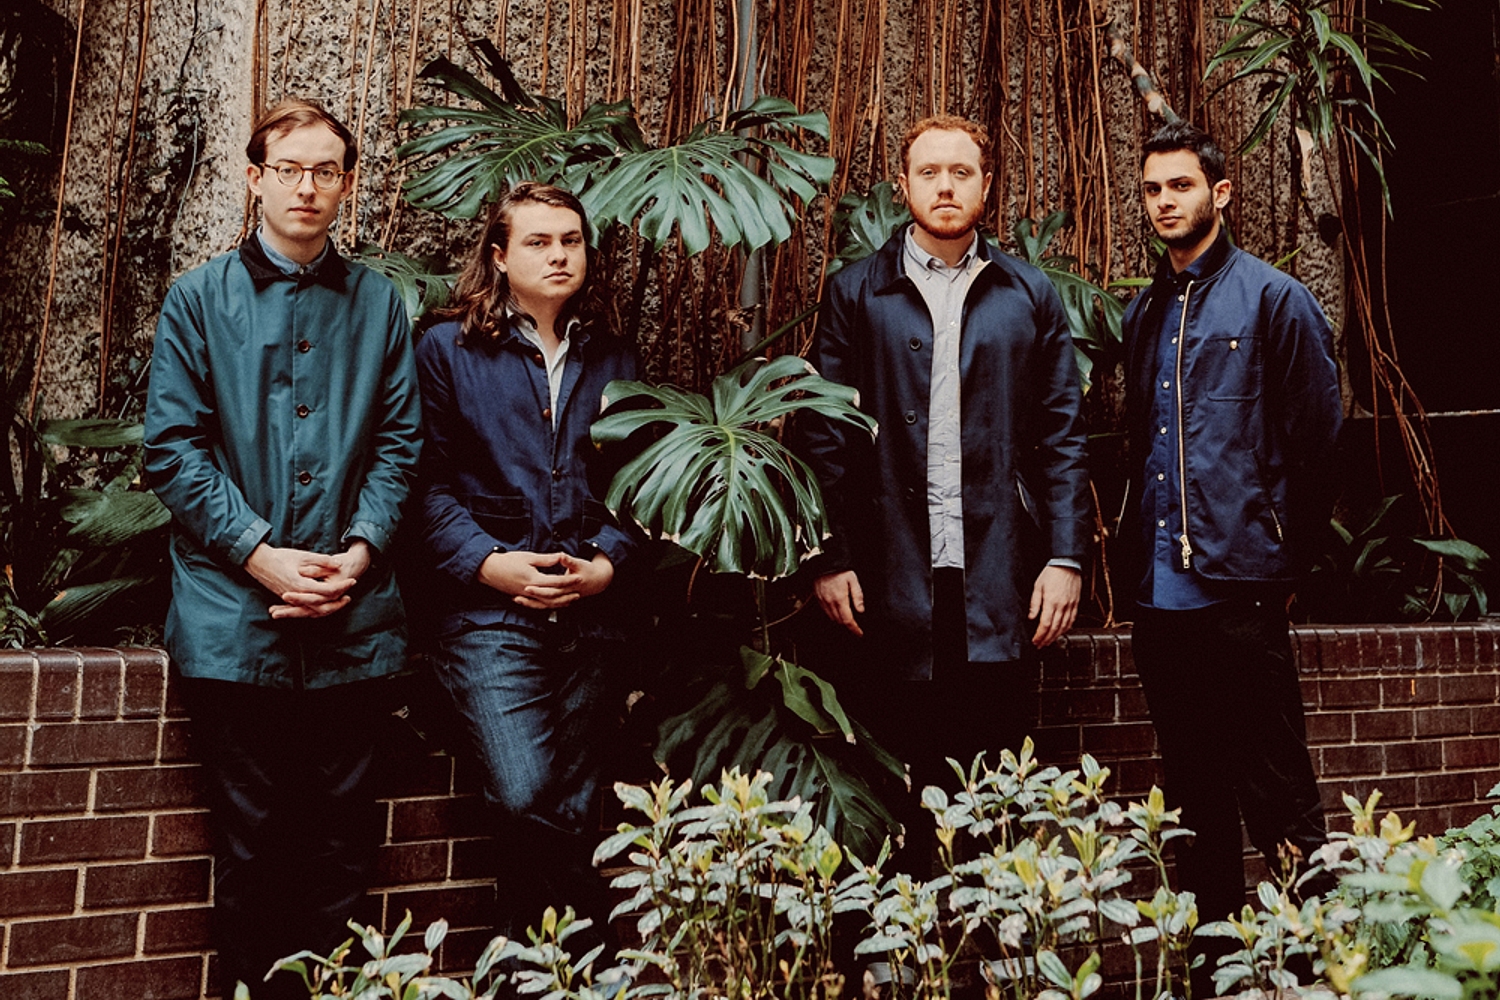 UNKLE ‘reconstruct’ Bombay Bicycle Club’s ‘Feel’